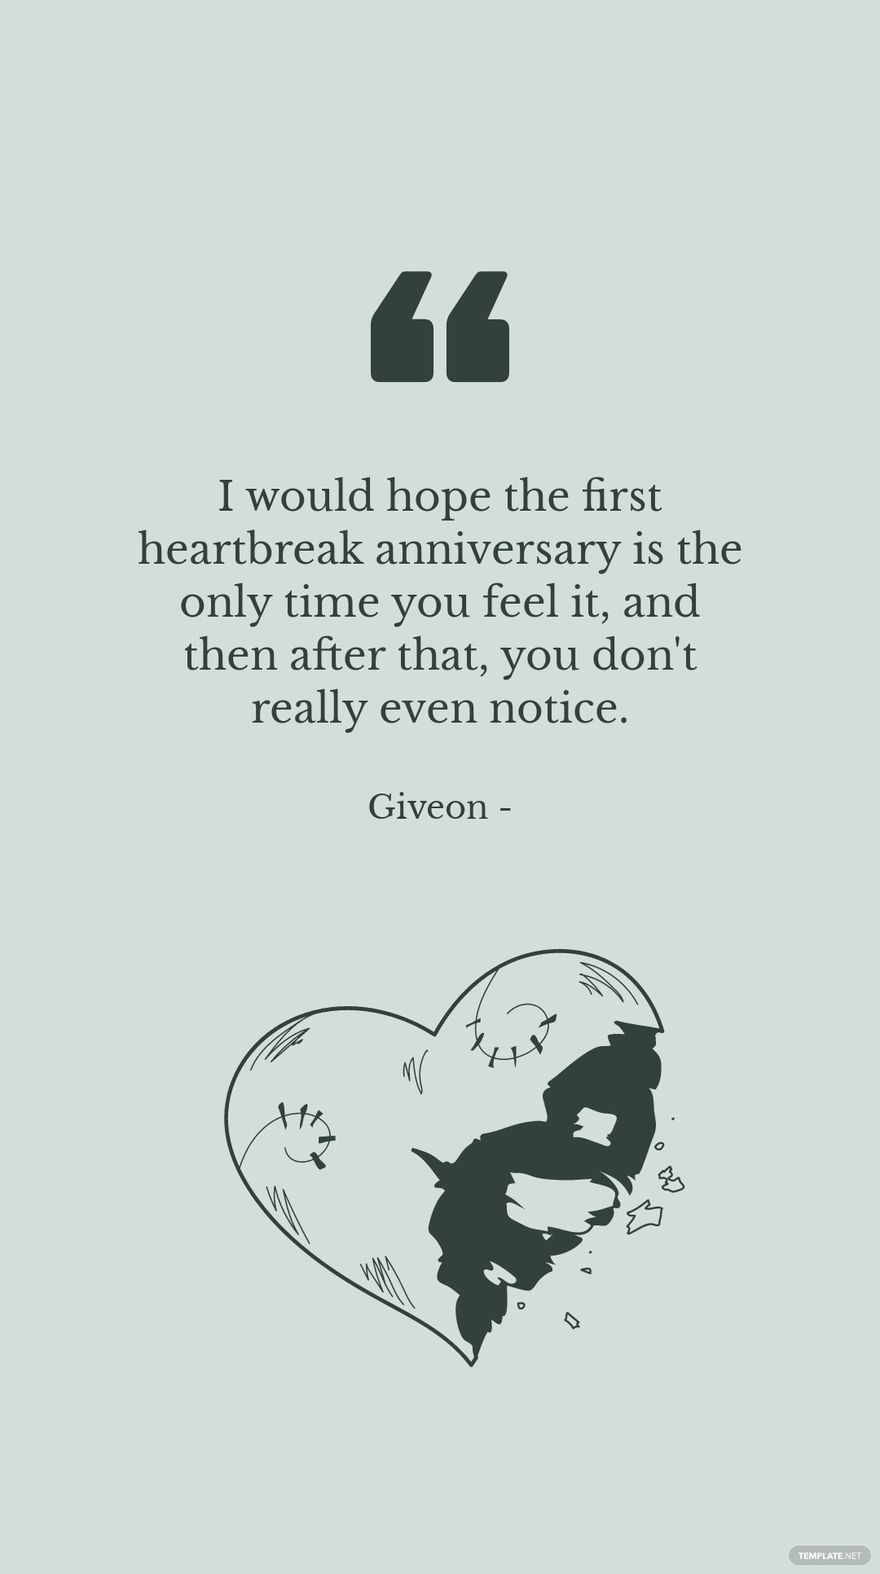 Giveon - I would hope the first heartbreak anniversary is the only time you feel it, and then after that, you don't really even notice.